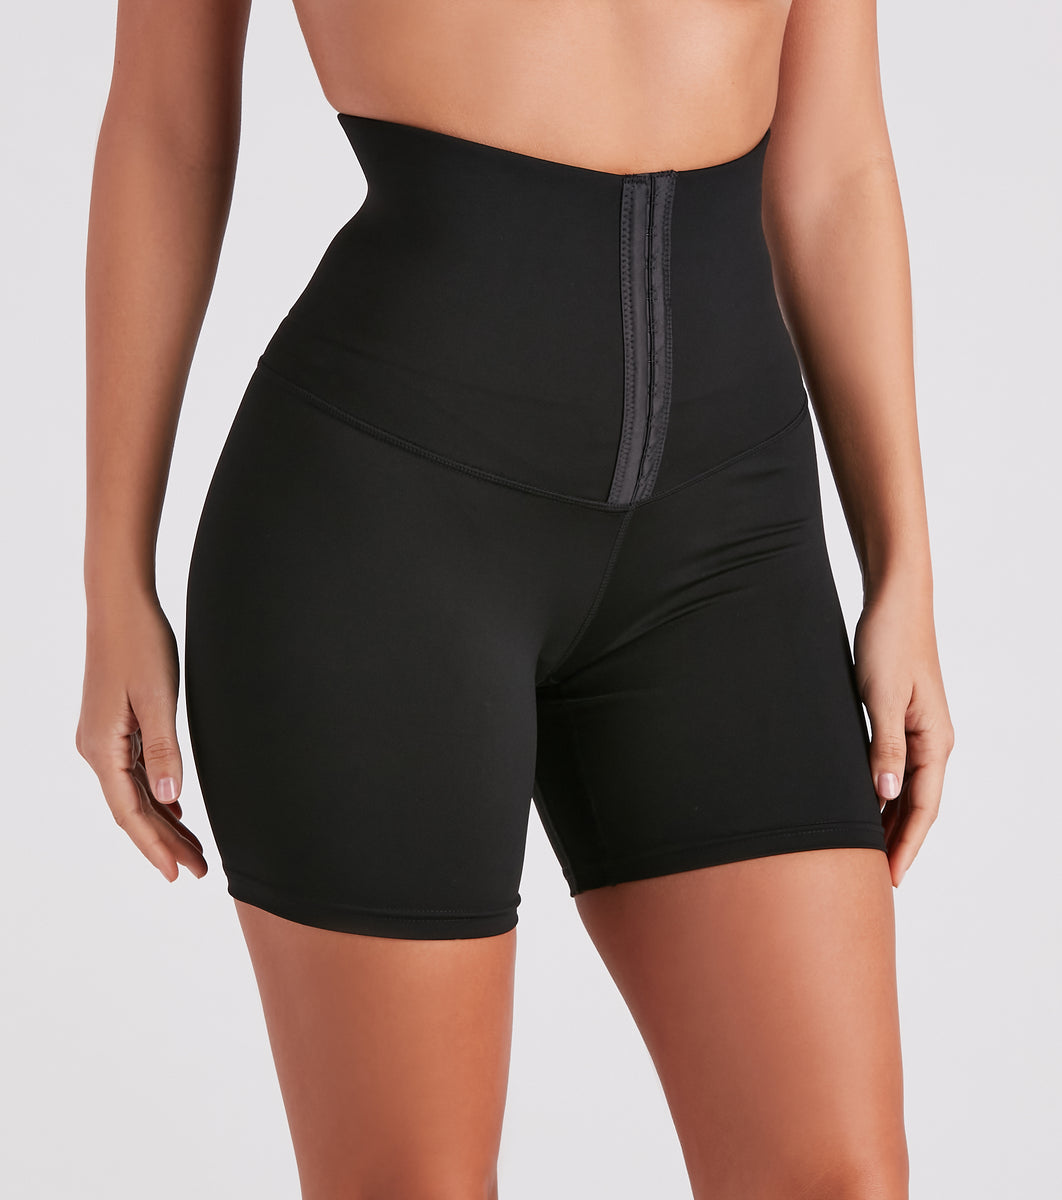 Windsor Cinched Silhouette Corset Shaper Shorts